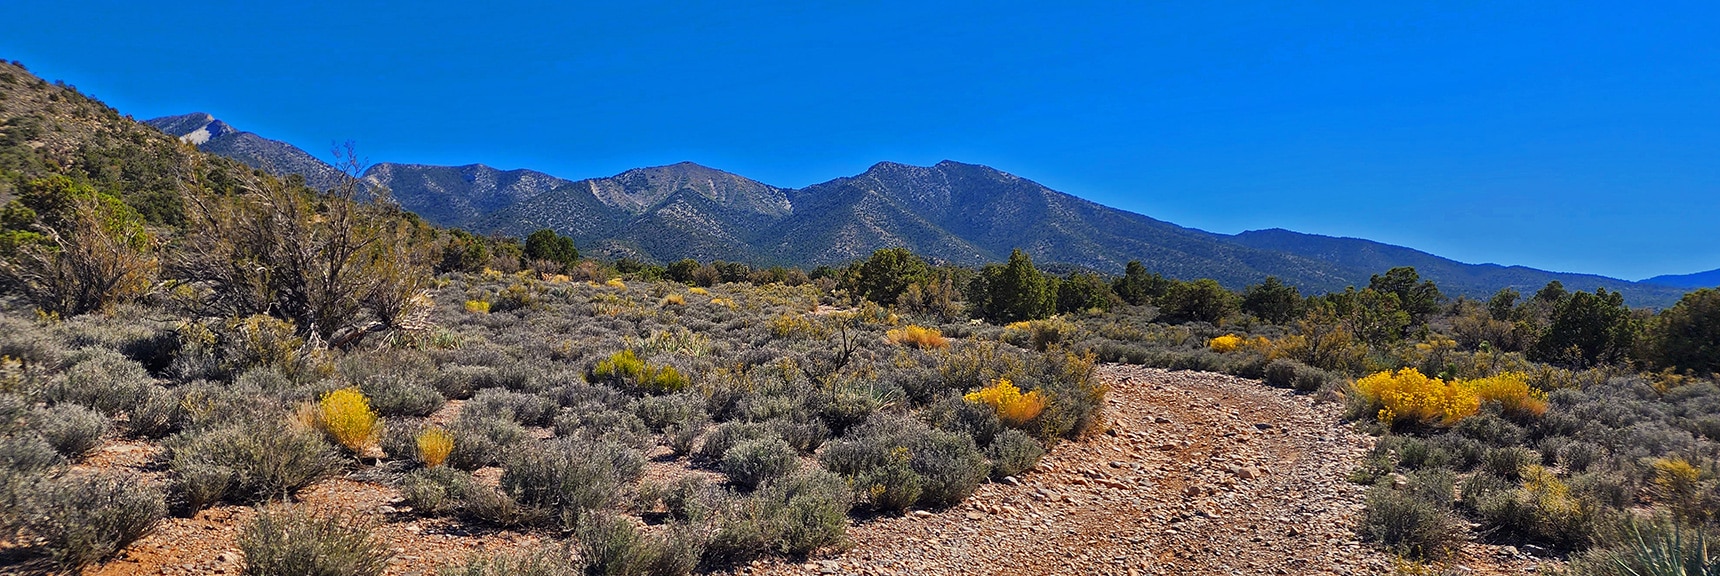 View from 4WD Road Back Toward La Madre Mountains and High Saddle Achieved | Kyle Canyon Grand Crossing | Northern Half | La Madre Mountains Wilderness, Nevada